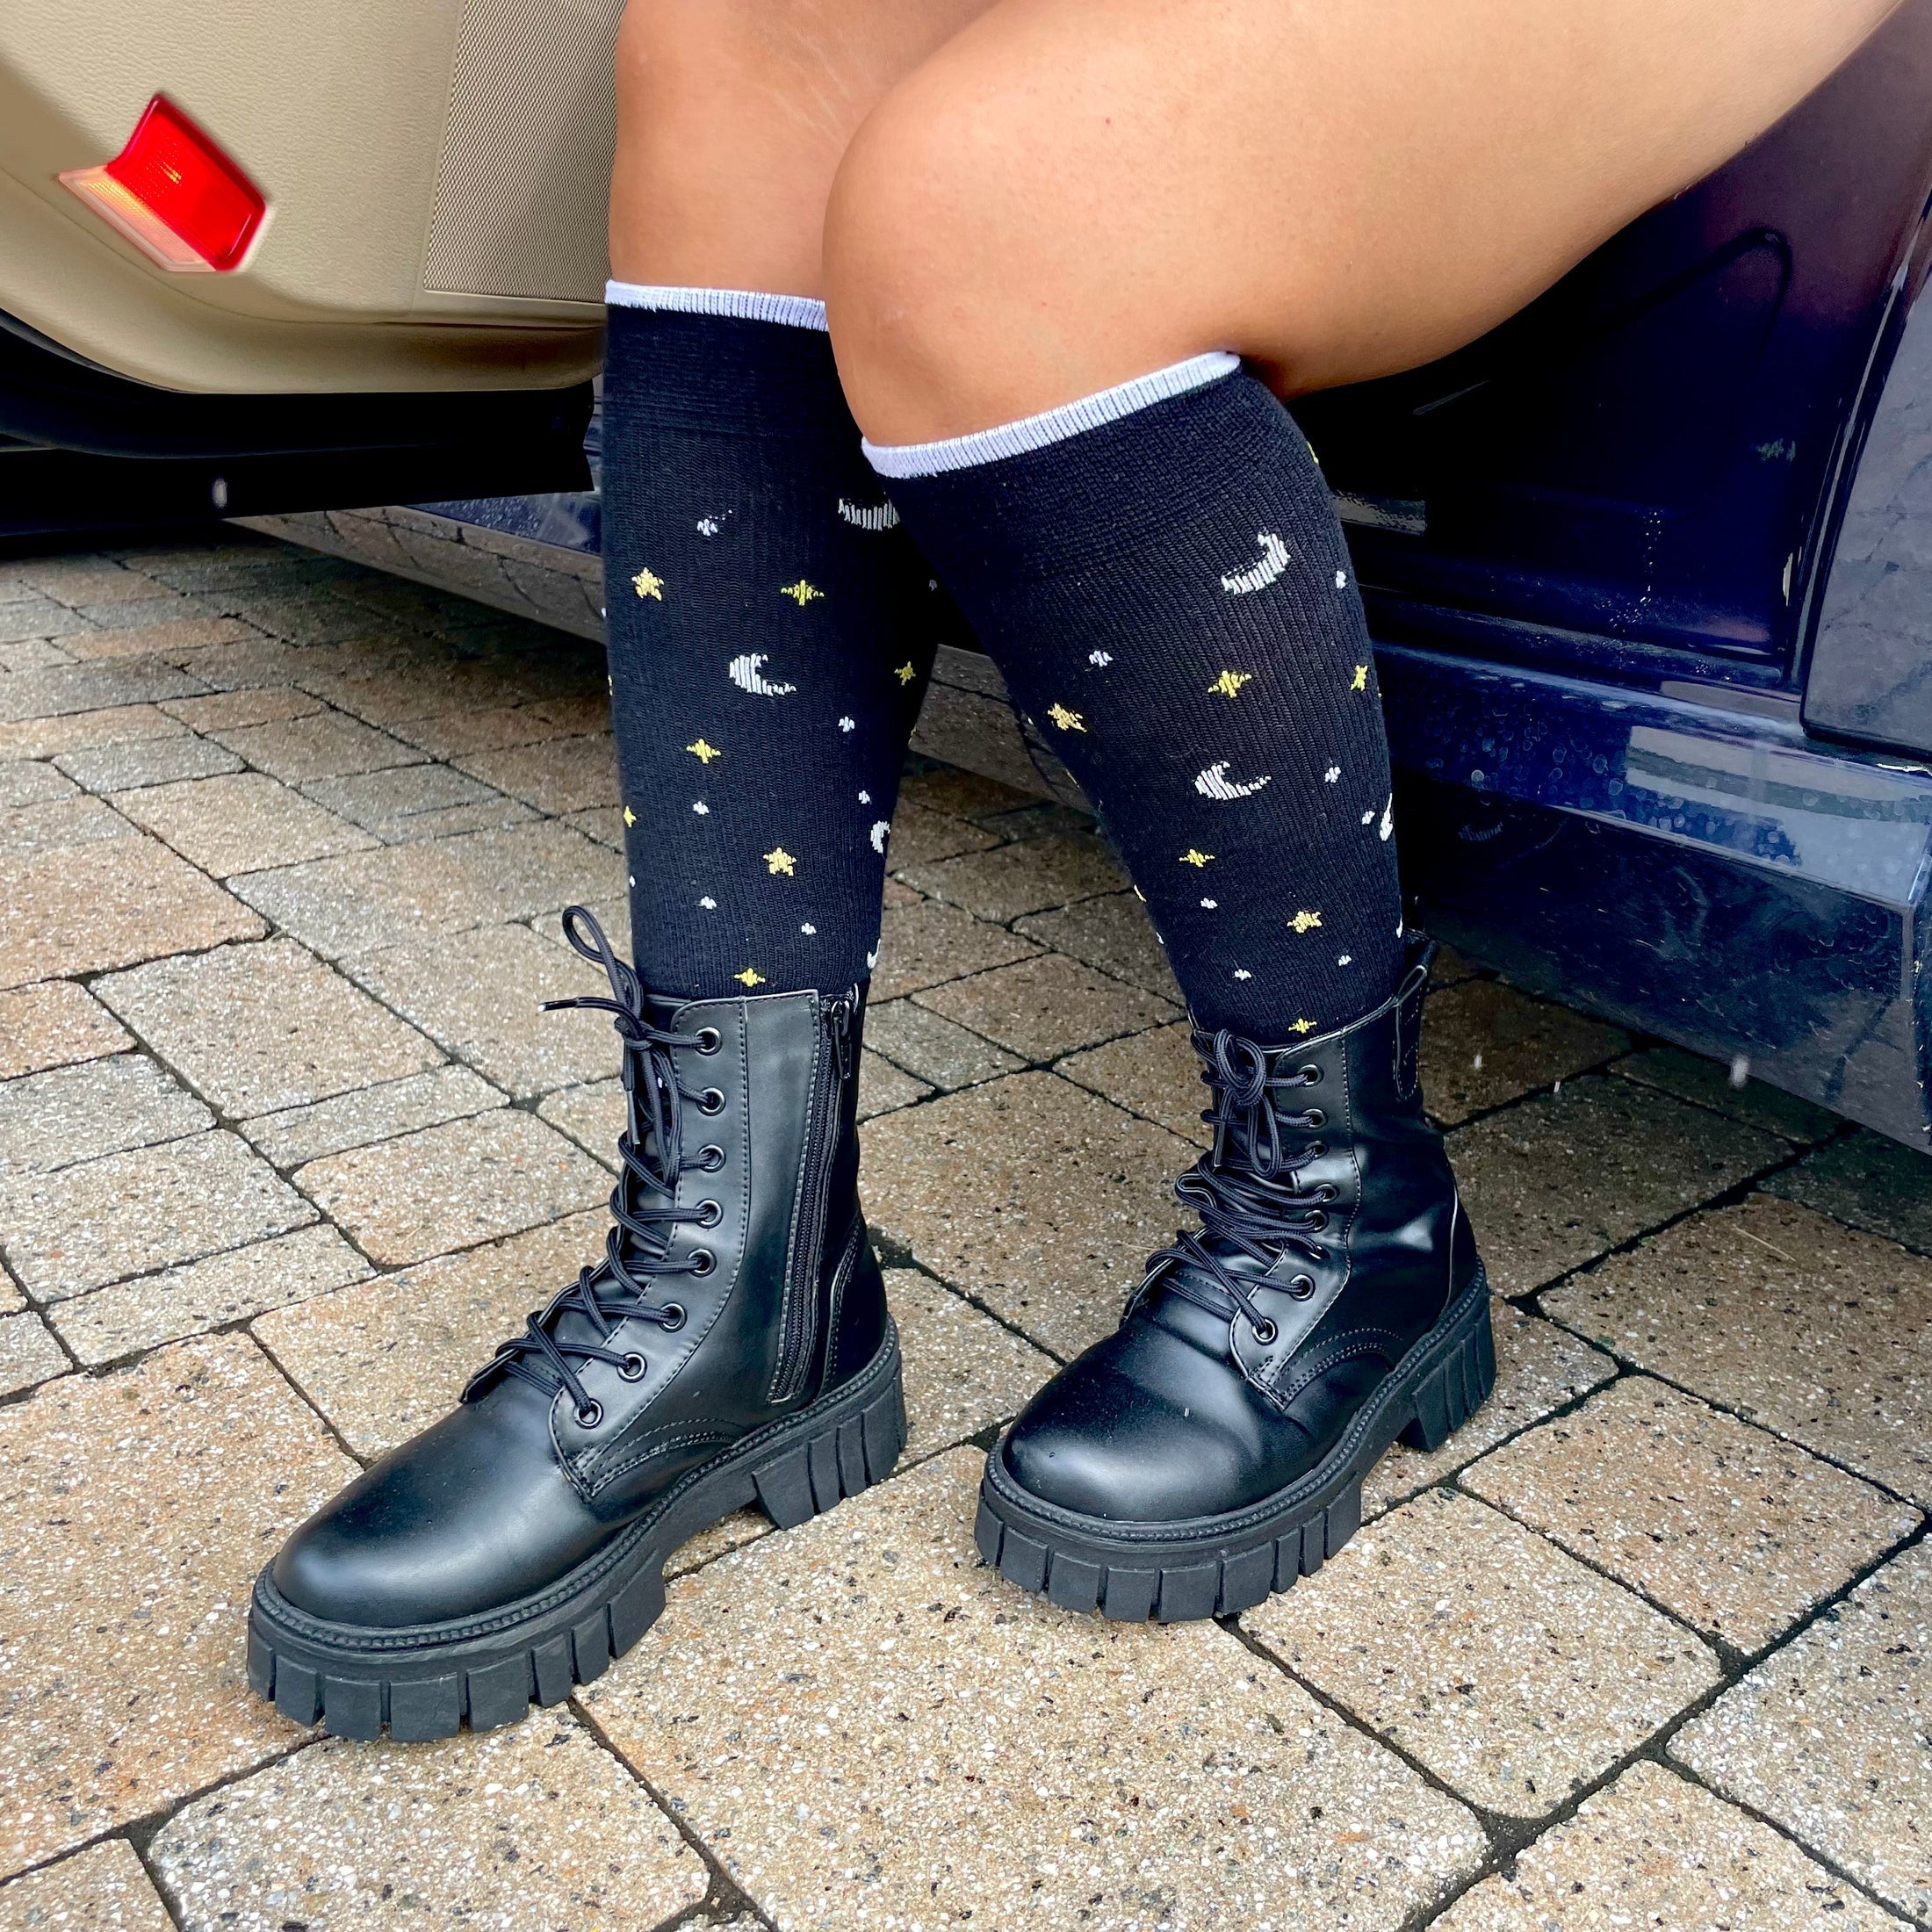 a cropped photo of a pair of tanned legs wearing black knee high socks with a heathered grey toe and heel and pattern of petite white and gold stars and crescent moons and chunky black boots